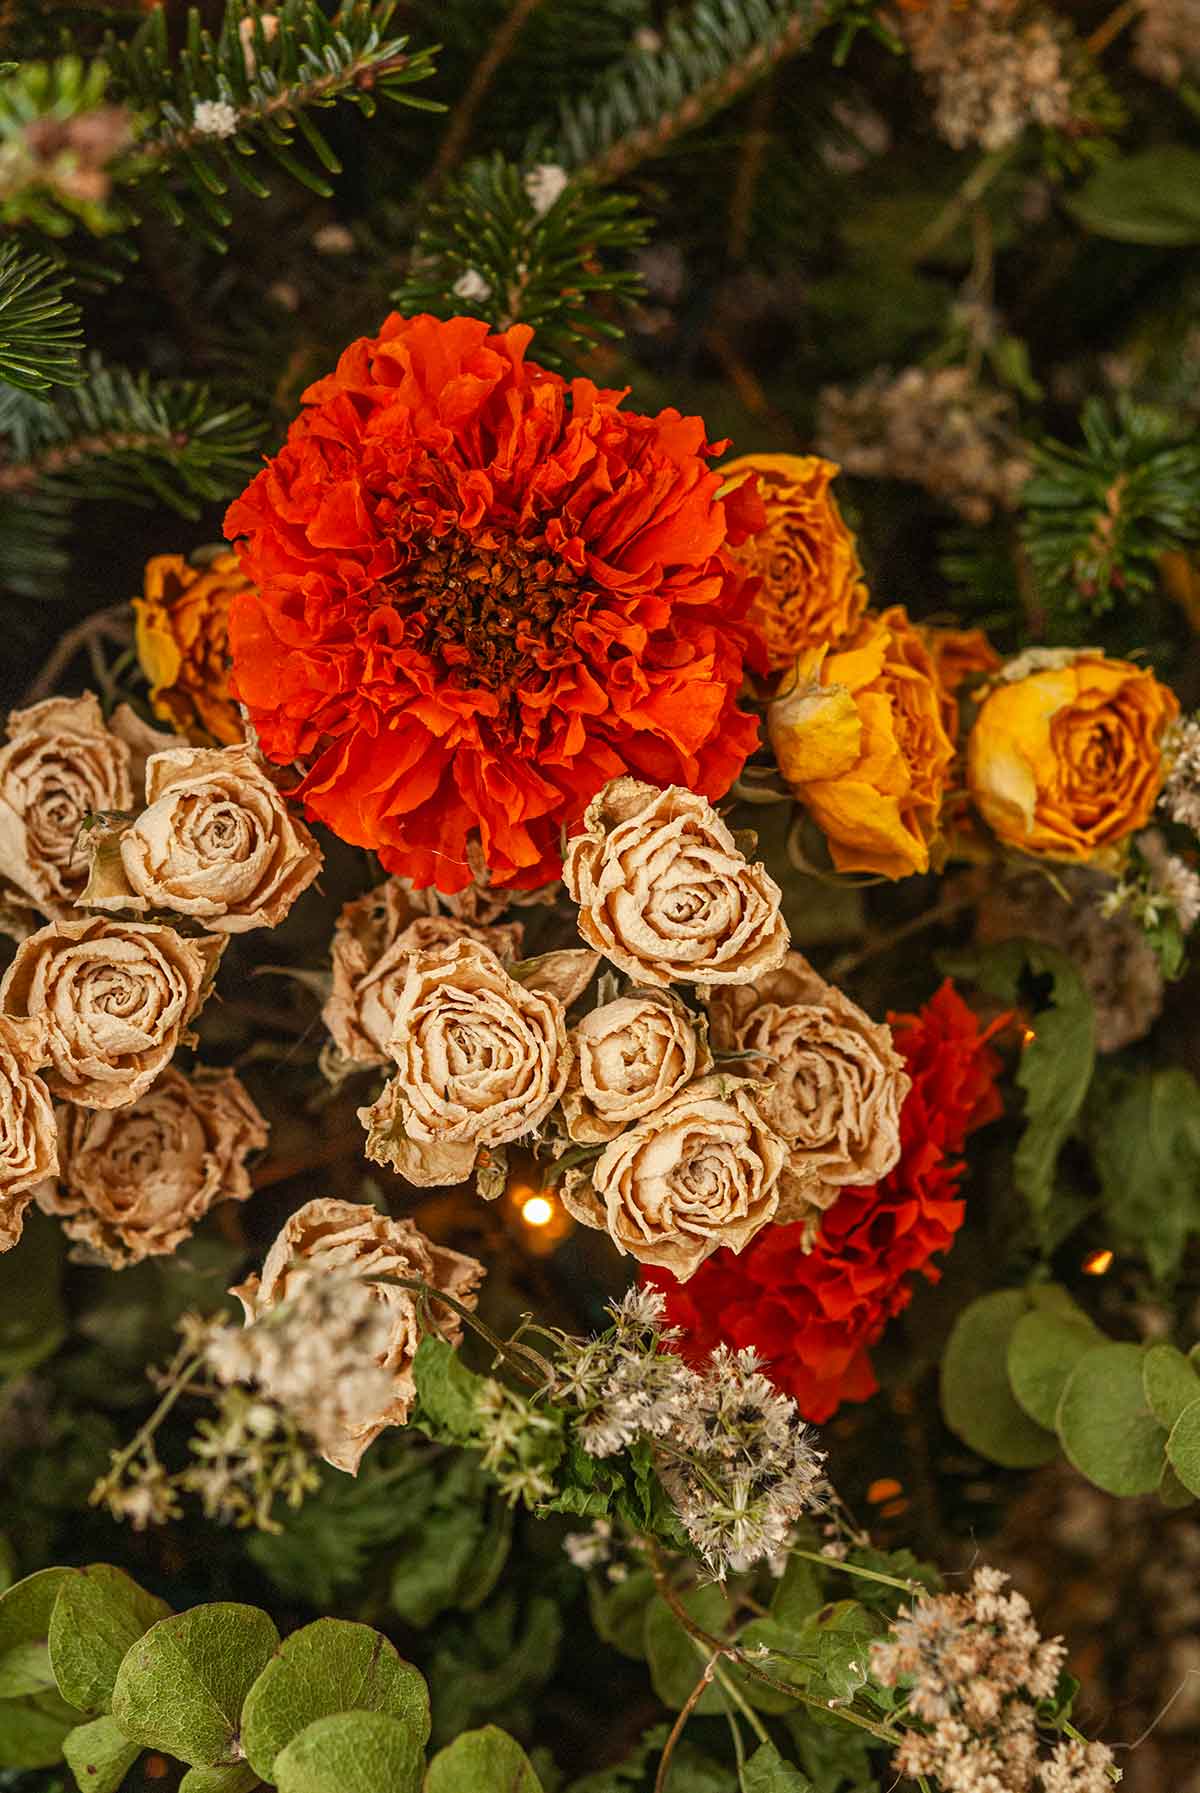 Dry Roses and marigolds in a Christmas tree.